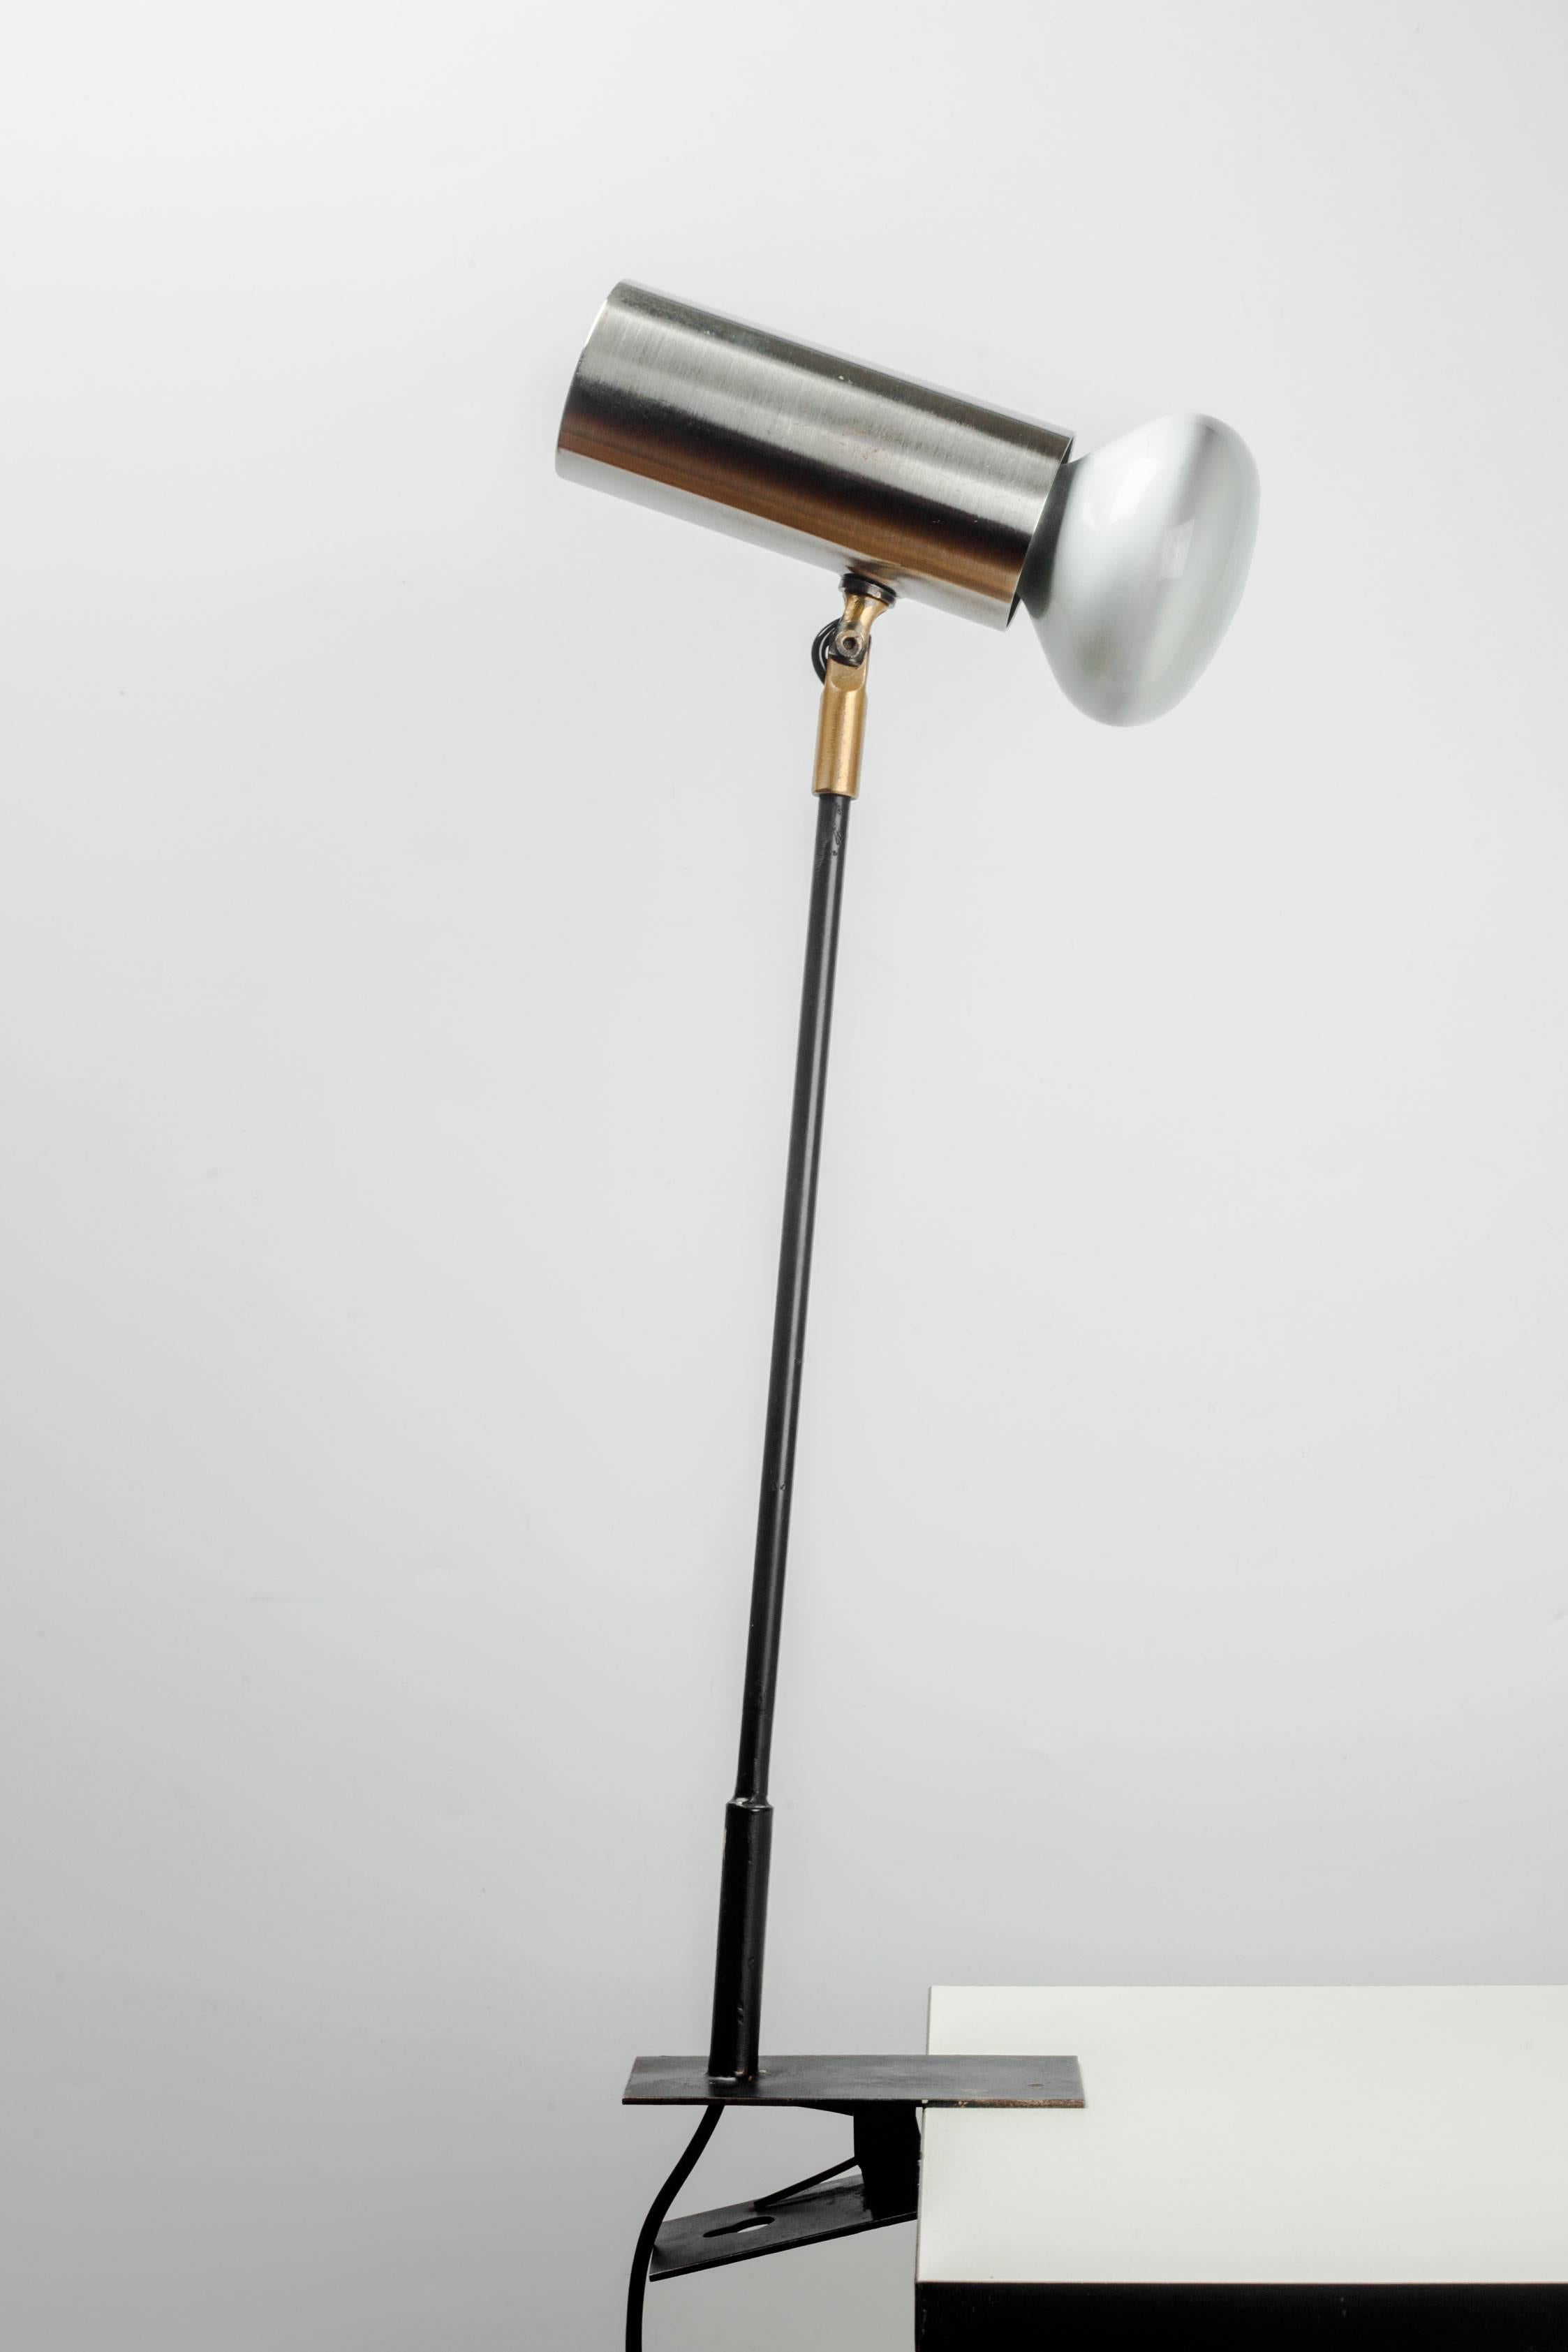 Elegant, vintage 1950s French desk lamp with shade made of brushed aluminum. At the end of the black metal neck is a clamp for attachment to a desk, table or shelf. Recalls designs by Jacques Biny, Jean-Boris Lacroix and Alain Richard, it's a